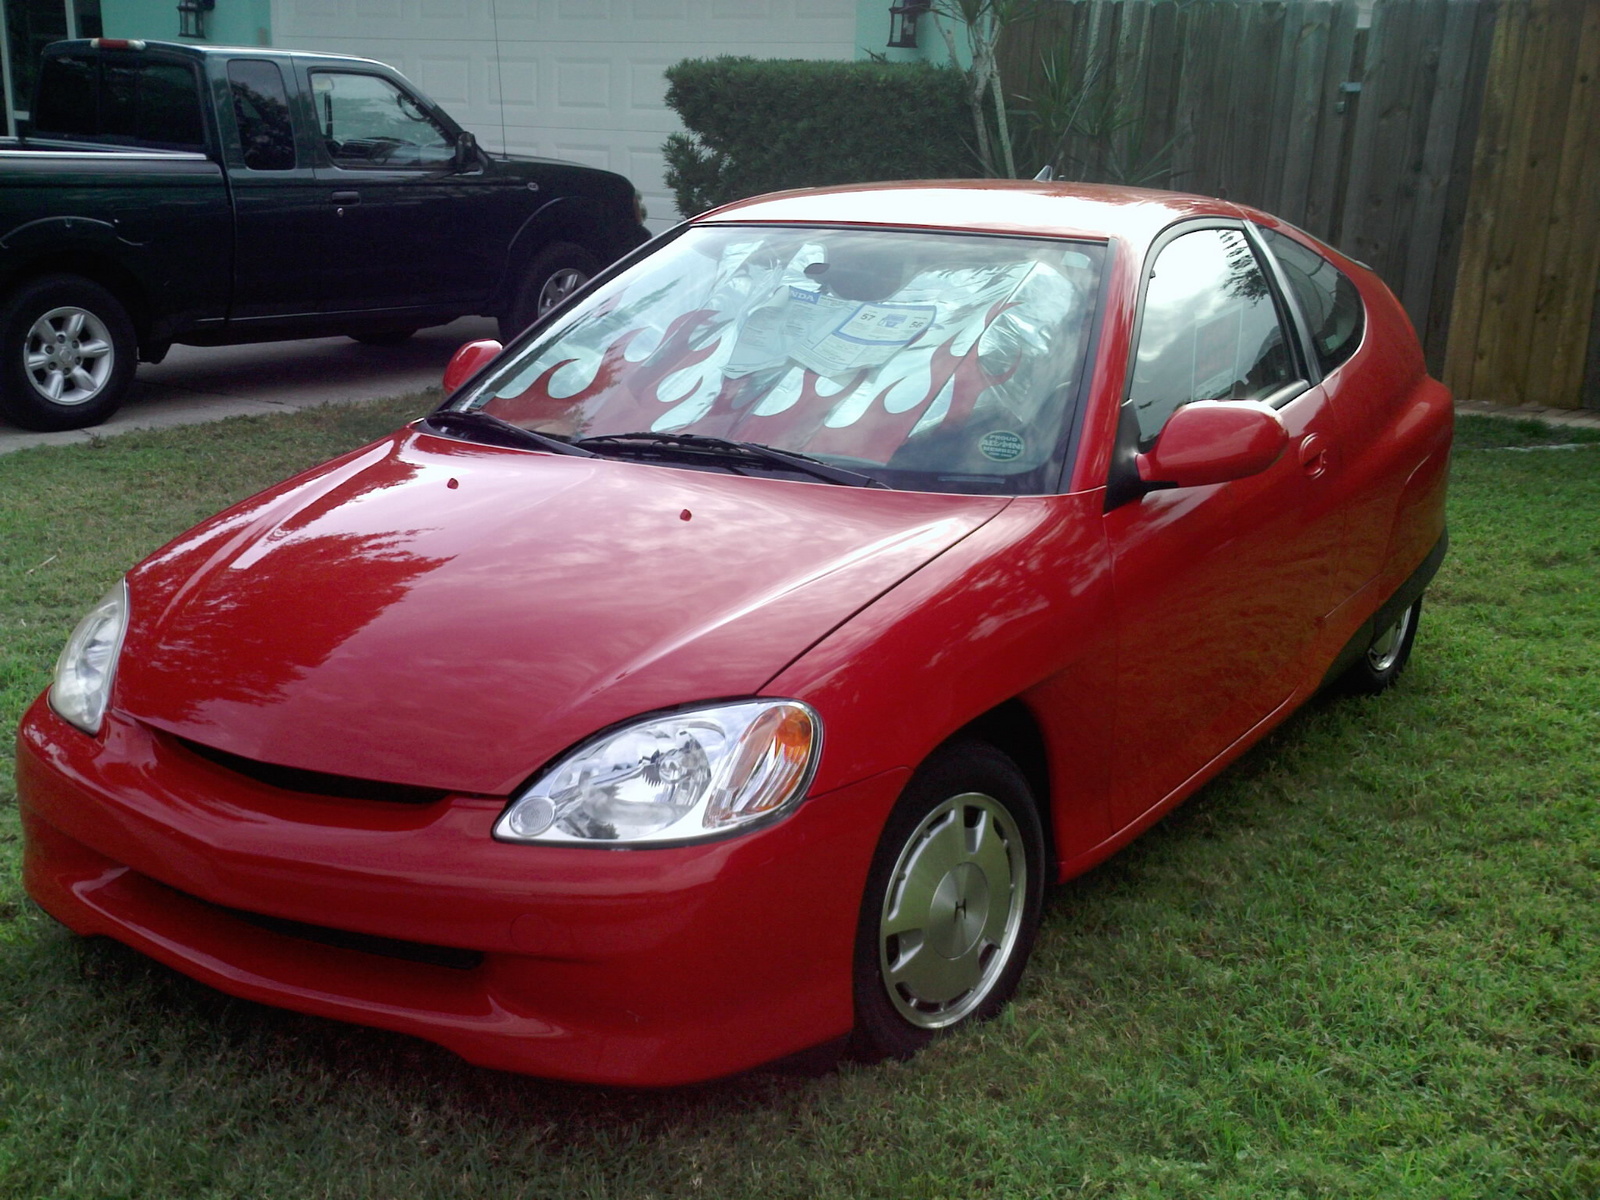 Used 2006 honda insight for sale #2